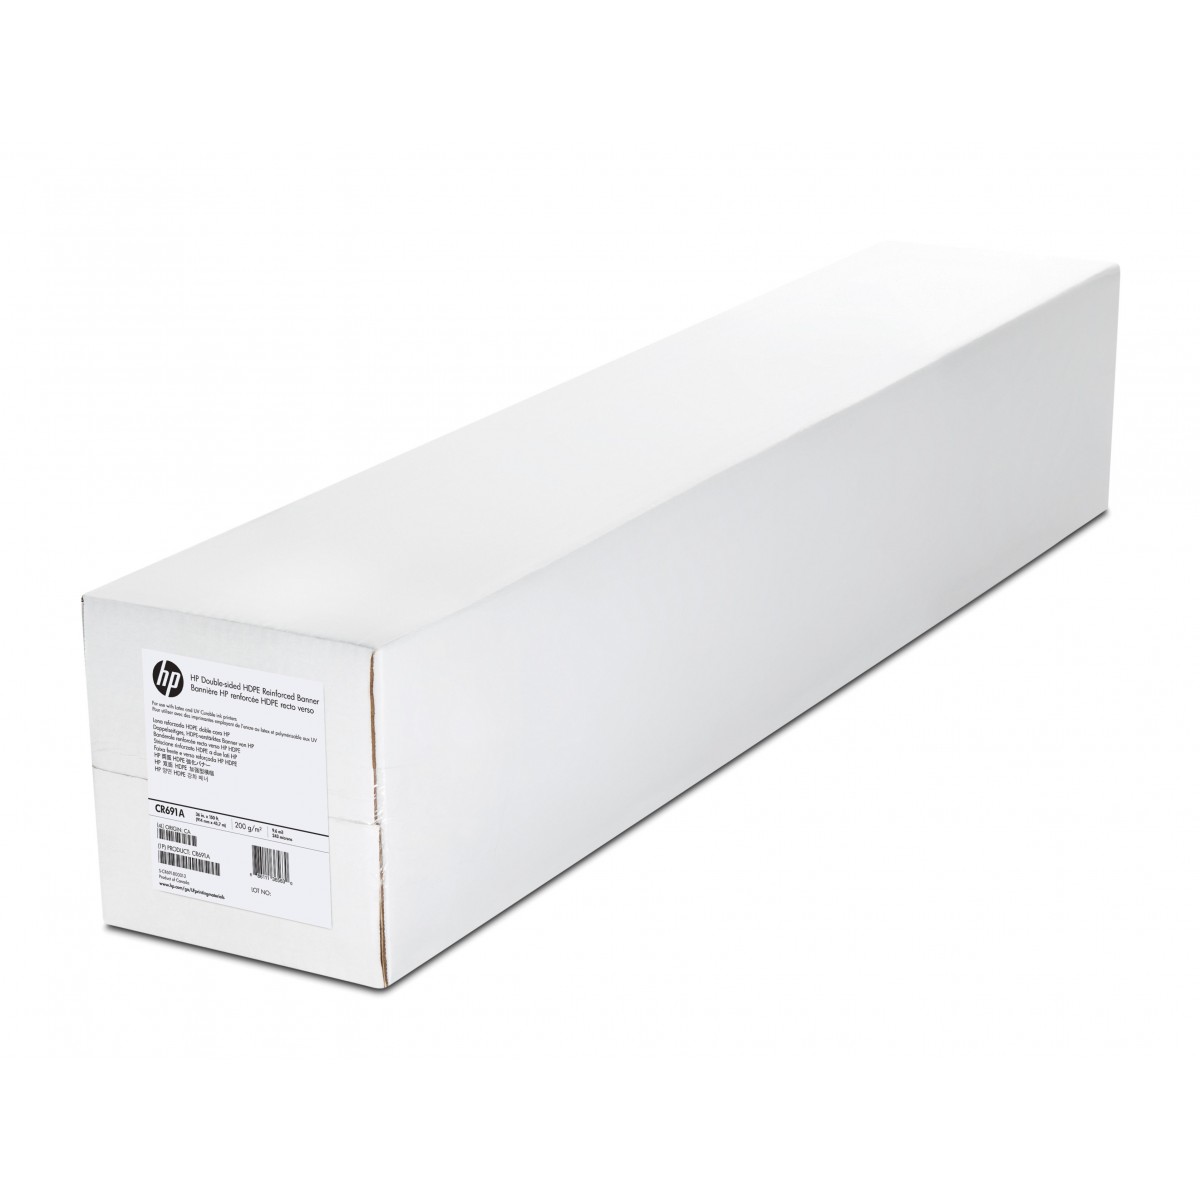 HP DOUBLE-SIDED HDPE REINFORCED BANNER - Endlos-/Bannerpapier - 200 g/m²